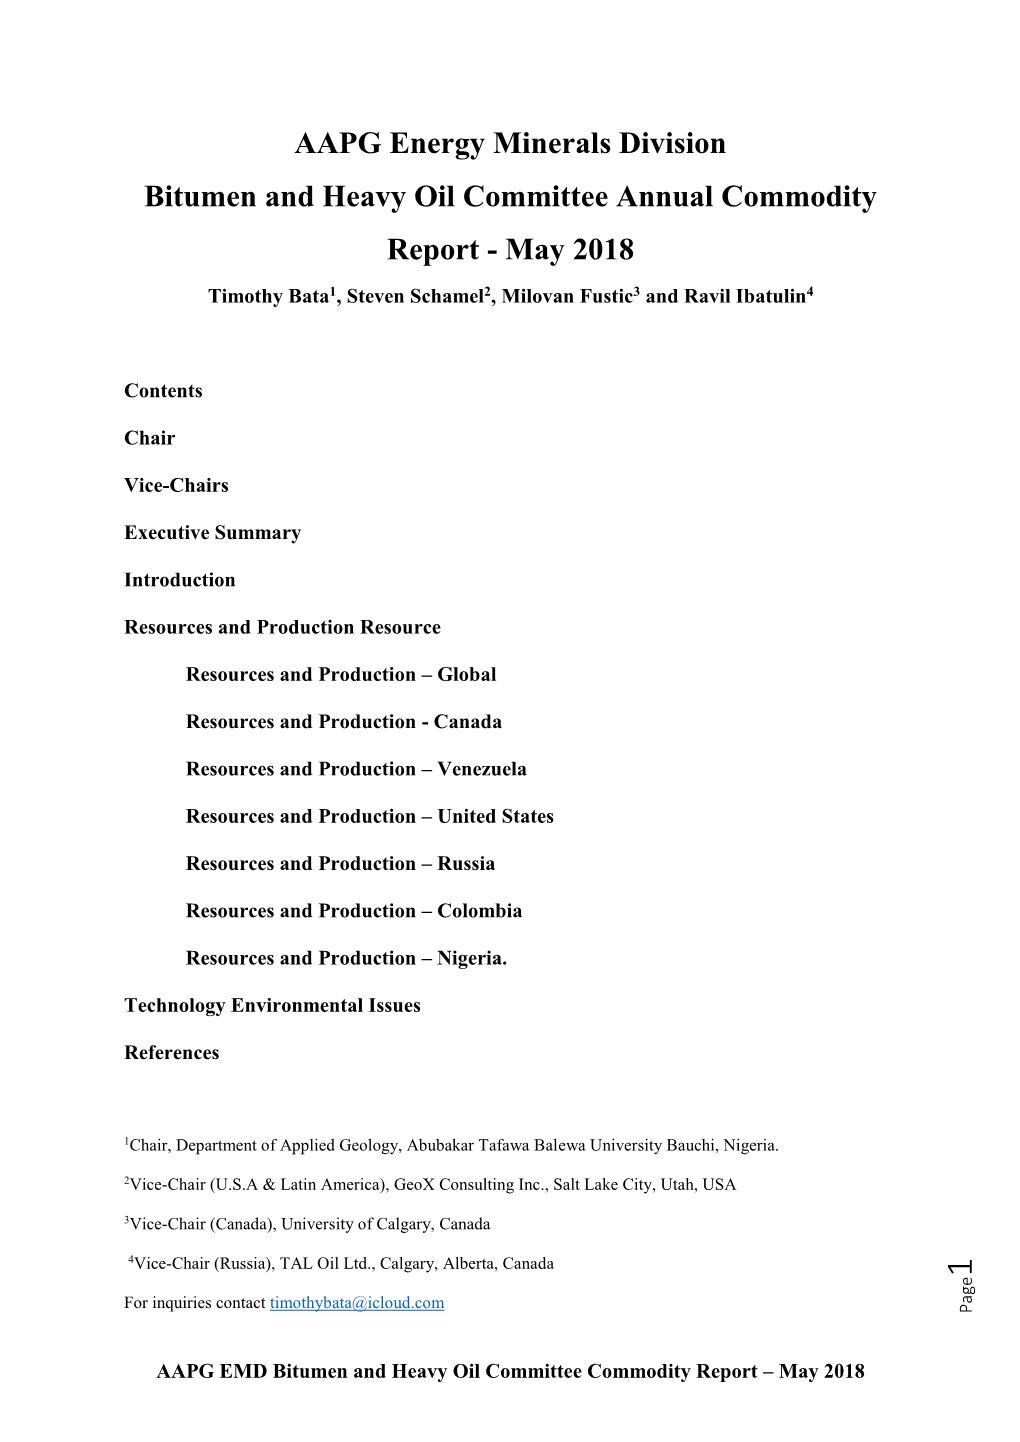 AAPG Energy Minerals Division Bitumen and Heavy Oil Committee Annual Commodity Report - May 2018